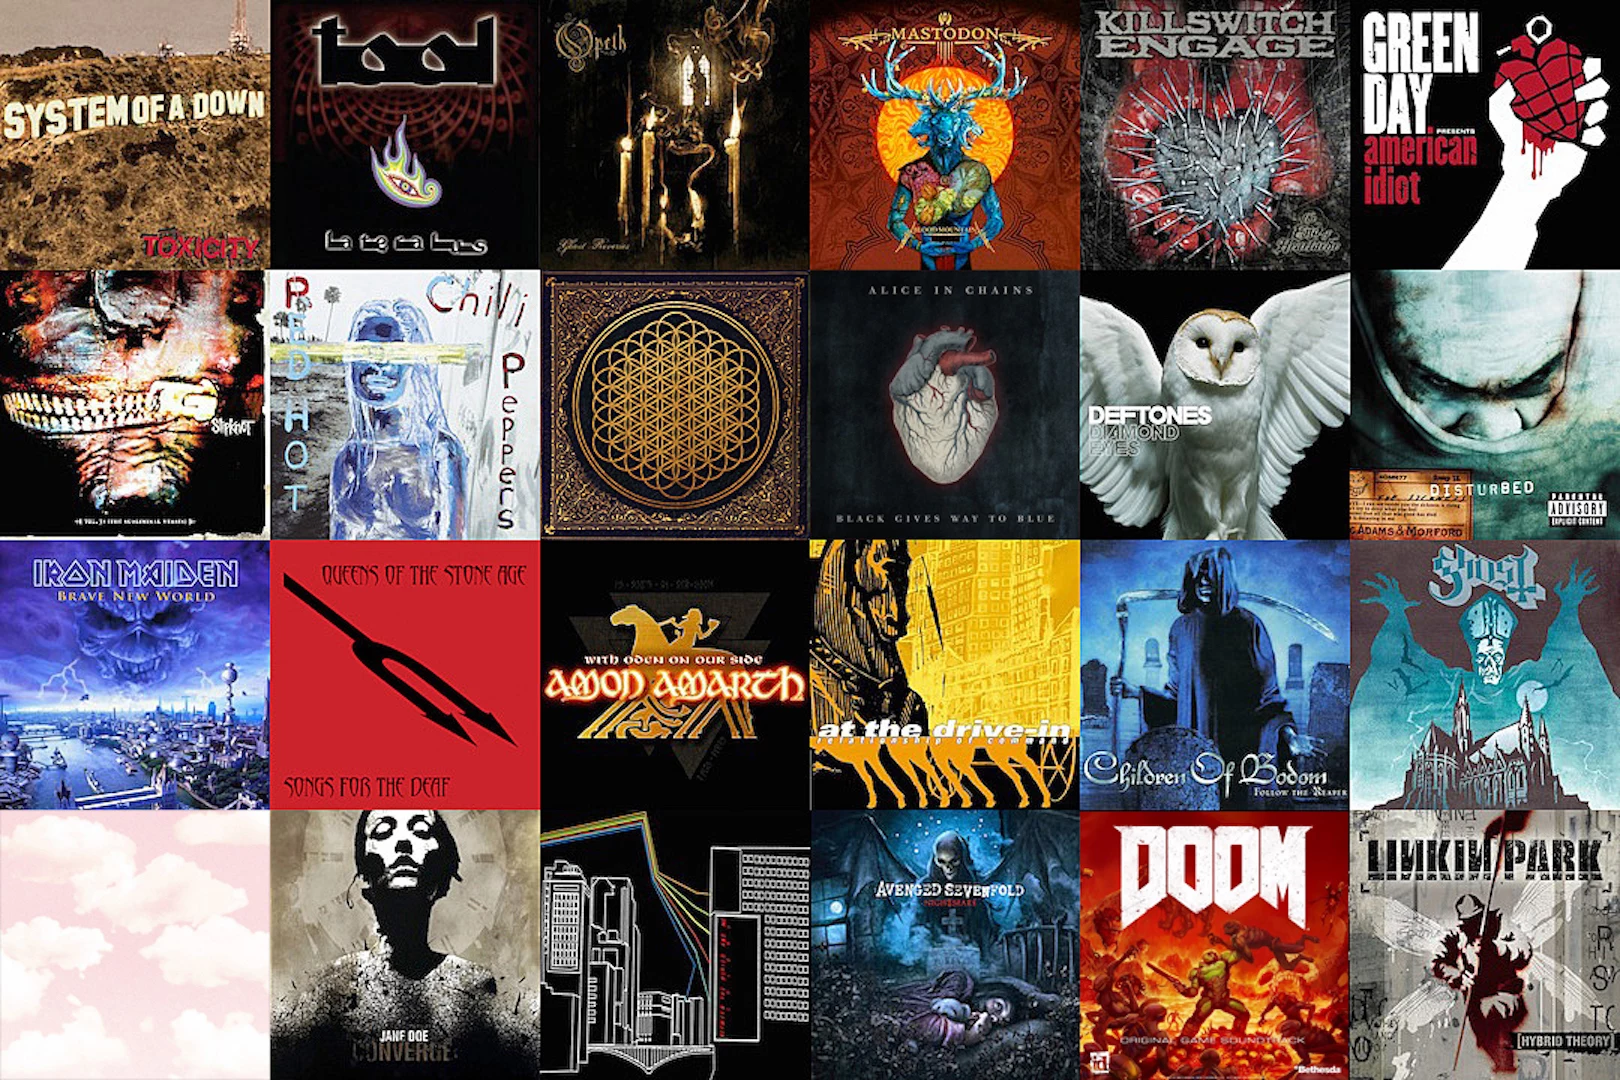 The 100 Best Rock + Metal Albums the 21st Century